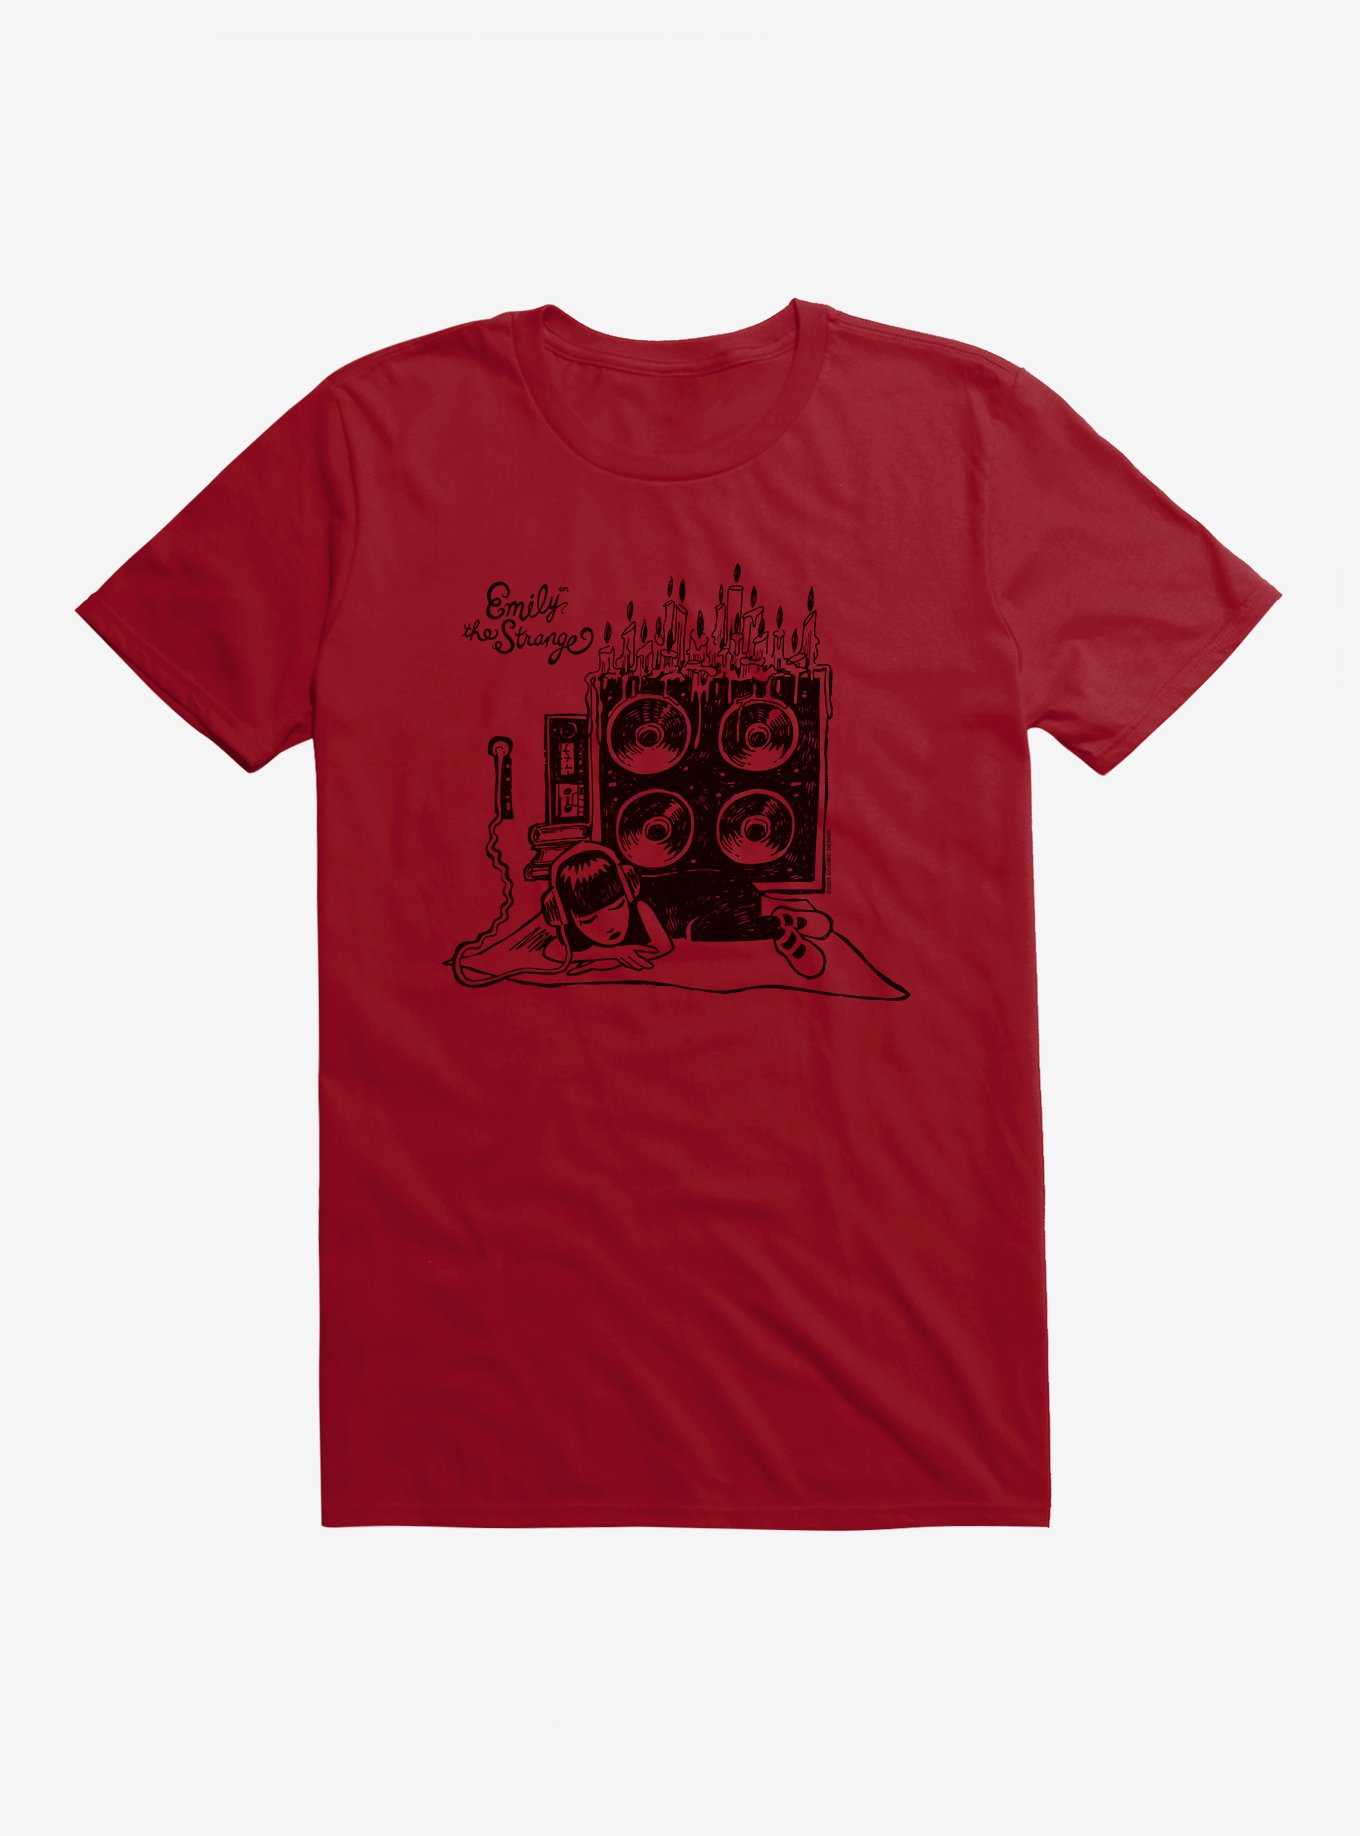 Emily The Strange Music To My Ears T-Shirt, , hi-res